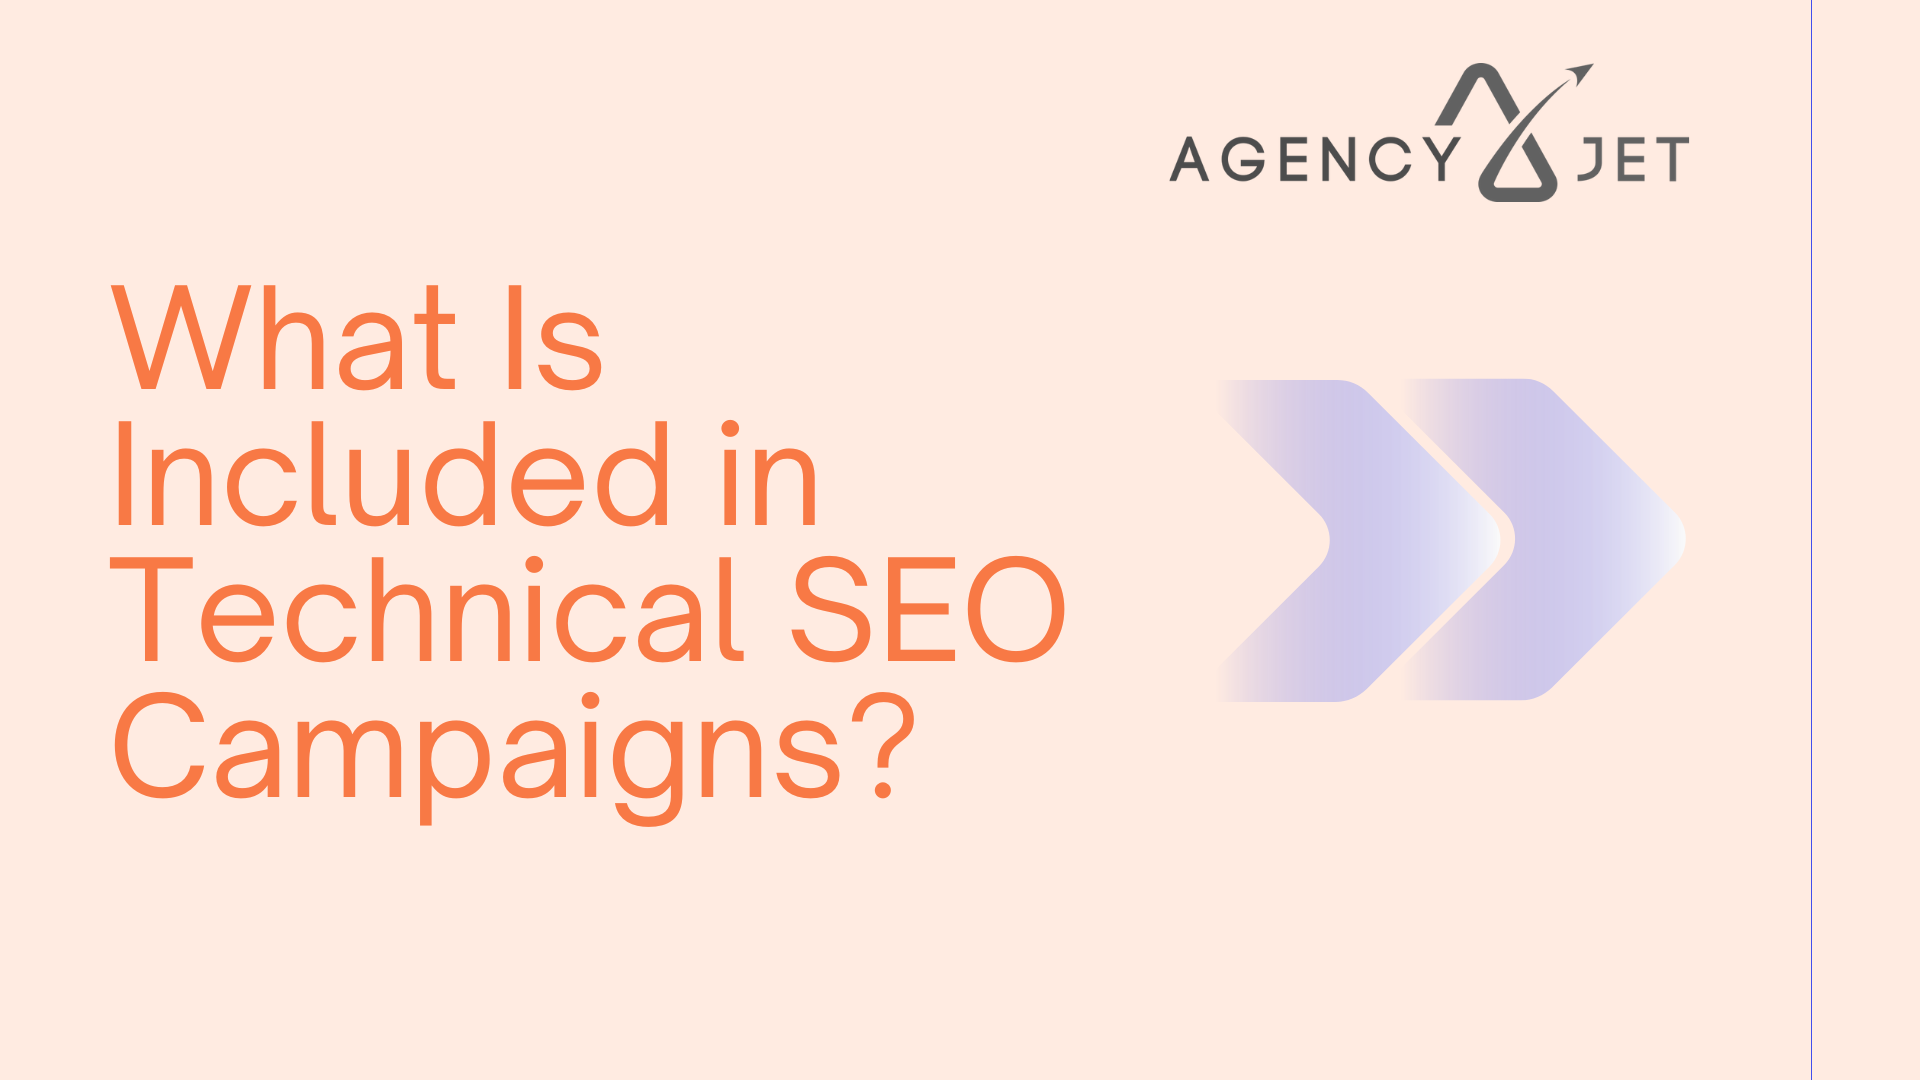 What Is Included in Technical SEO Campaigns - Agency Jet